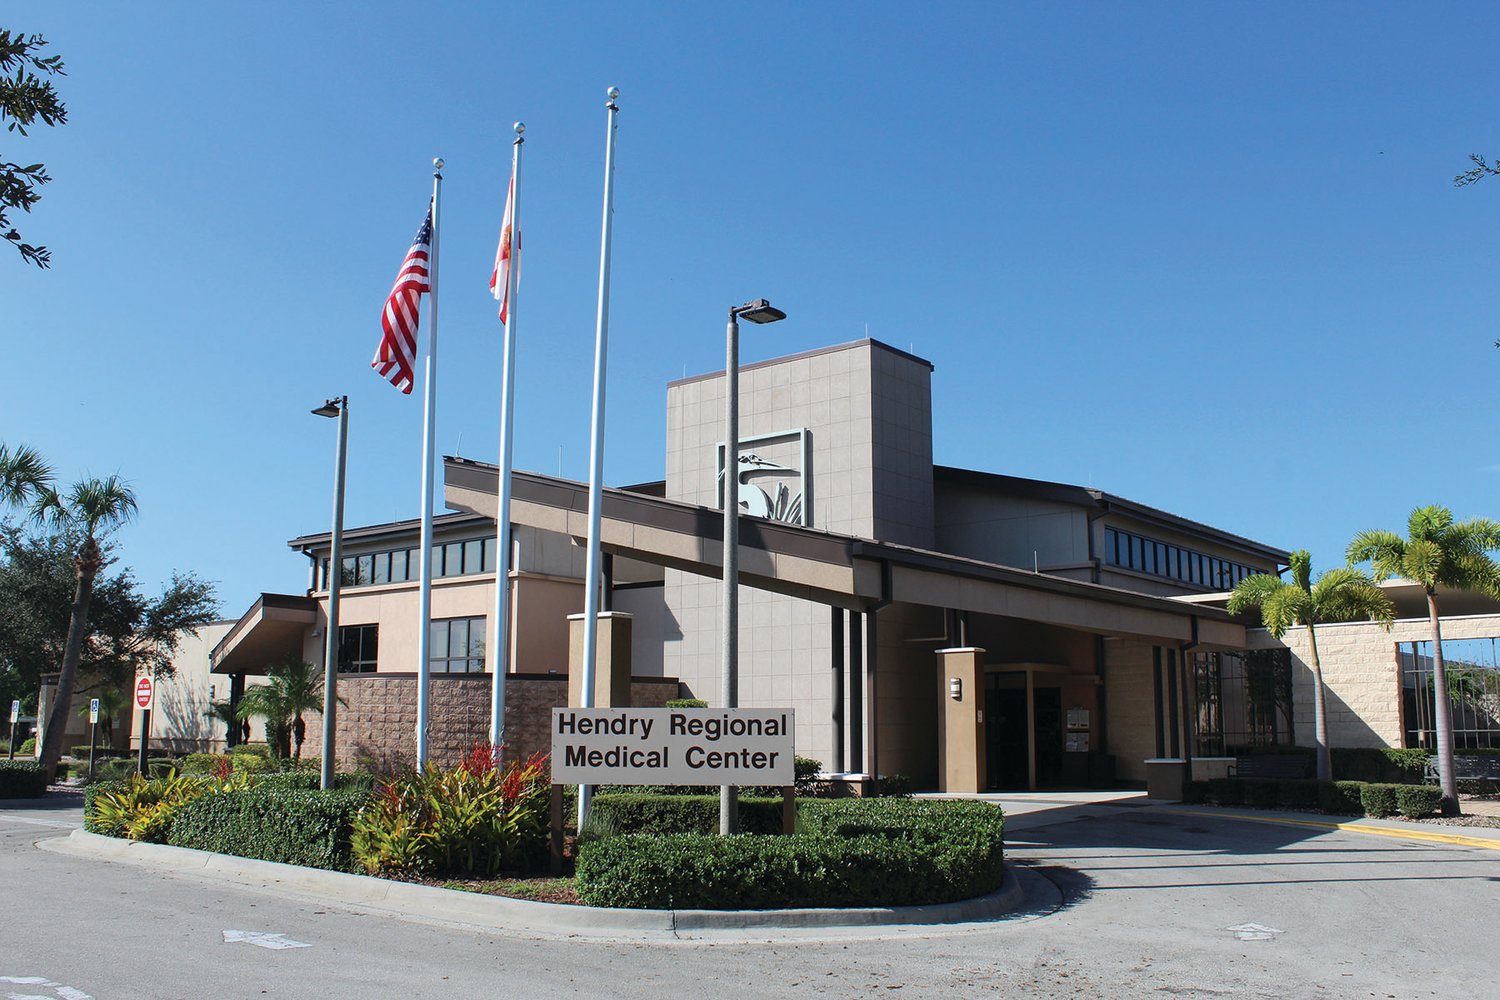 This picture is of the Hendry Regional Medical Center.